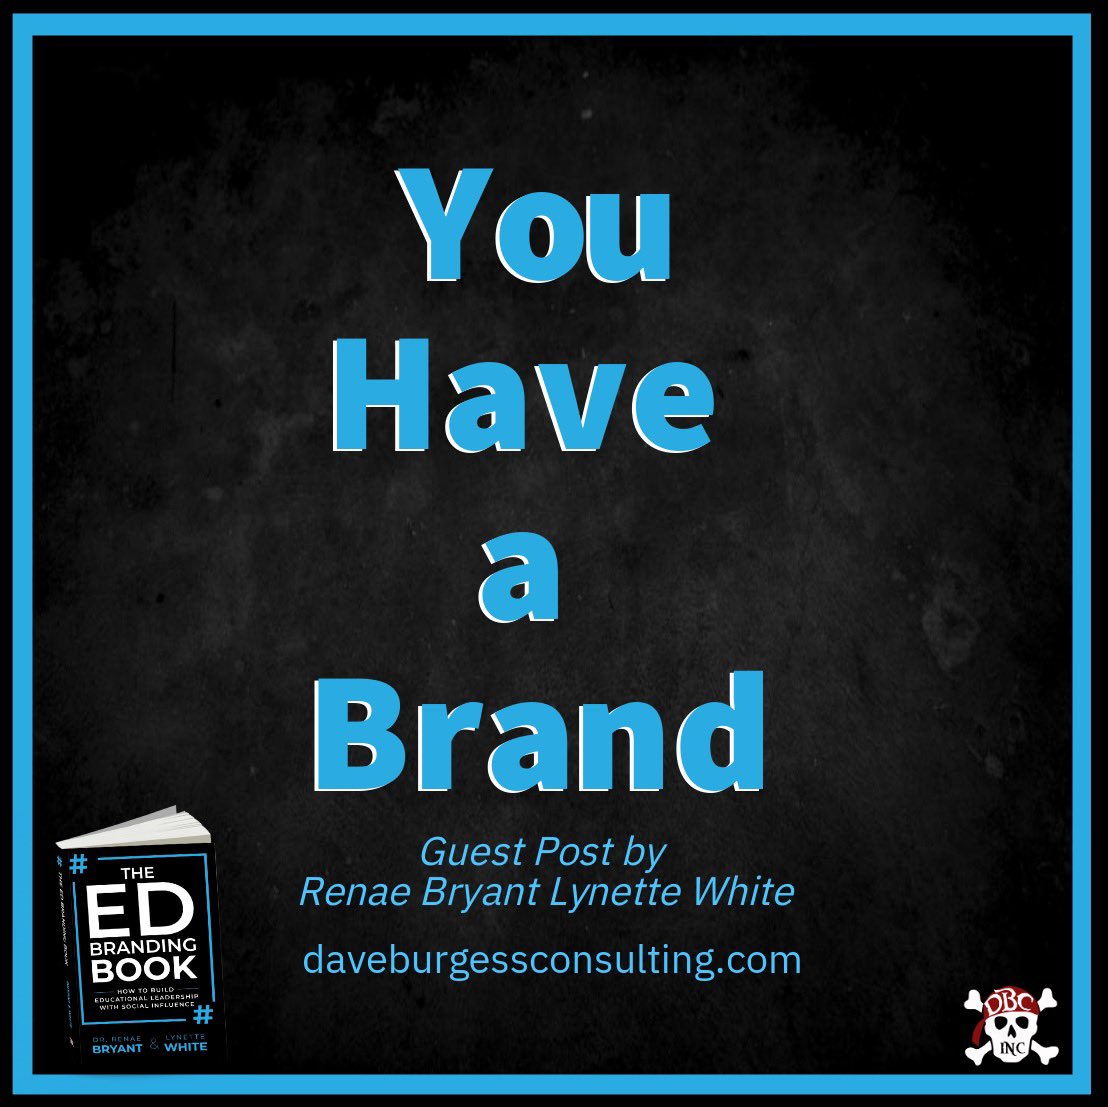 “You Have a Brand” New guest post from #EdBranding authors, @lynettewsocial & @DrRenaeBryant on the @dbc_inc site! daveburgessconsulting.com/blog/you-have-… #dbcincbooks #tlap #leadlap